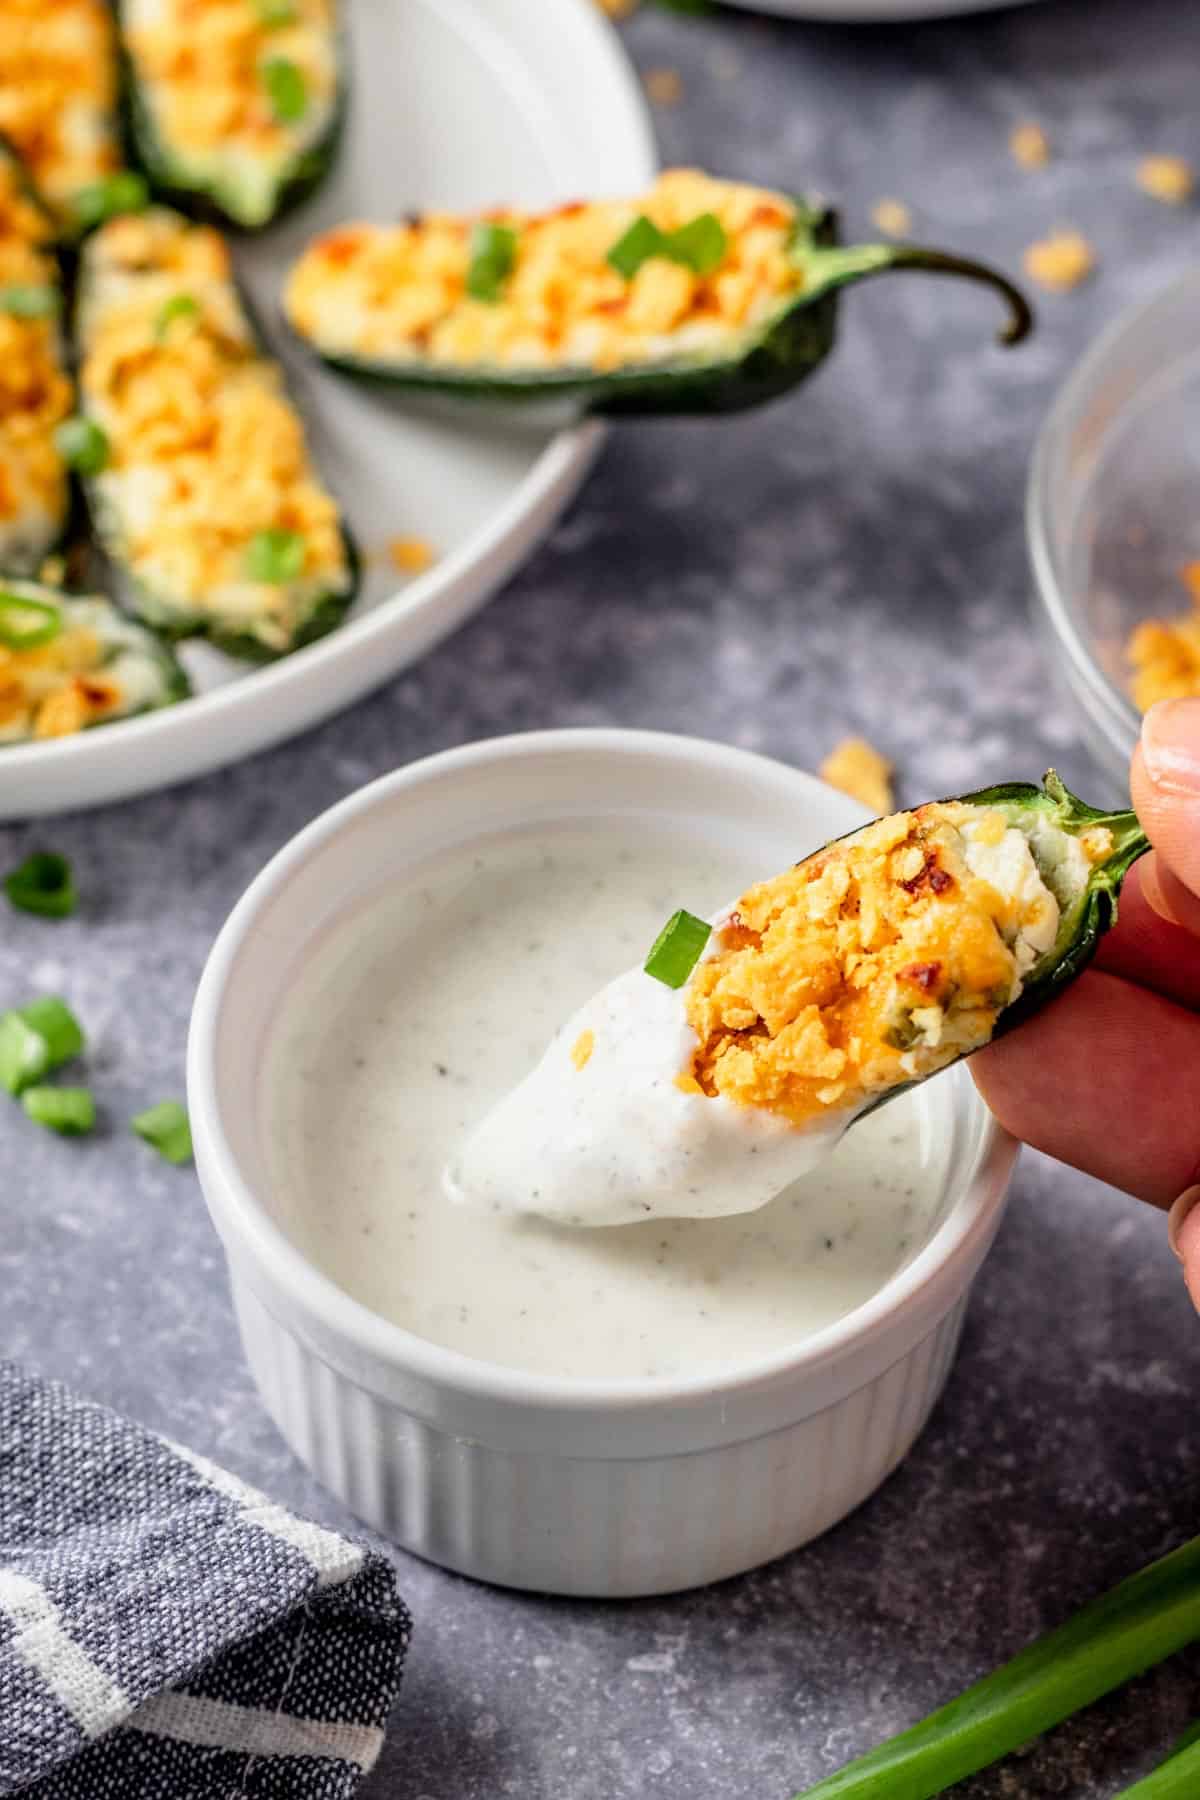 jalapeno popper dipped in ranch dressing